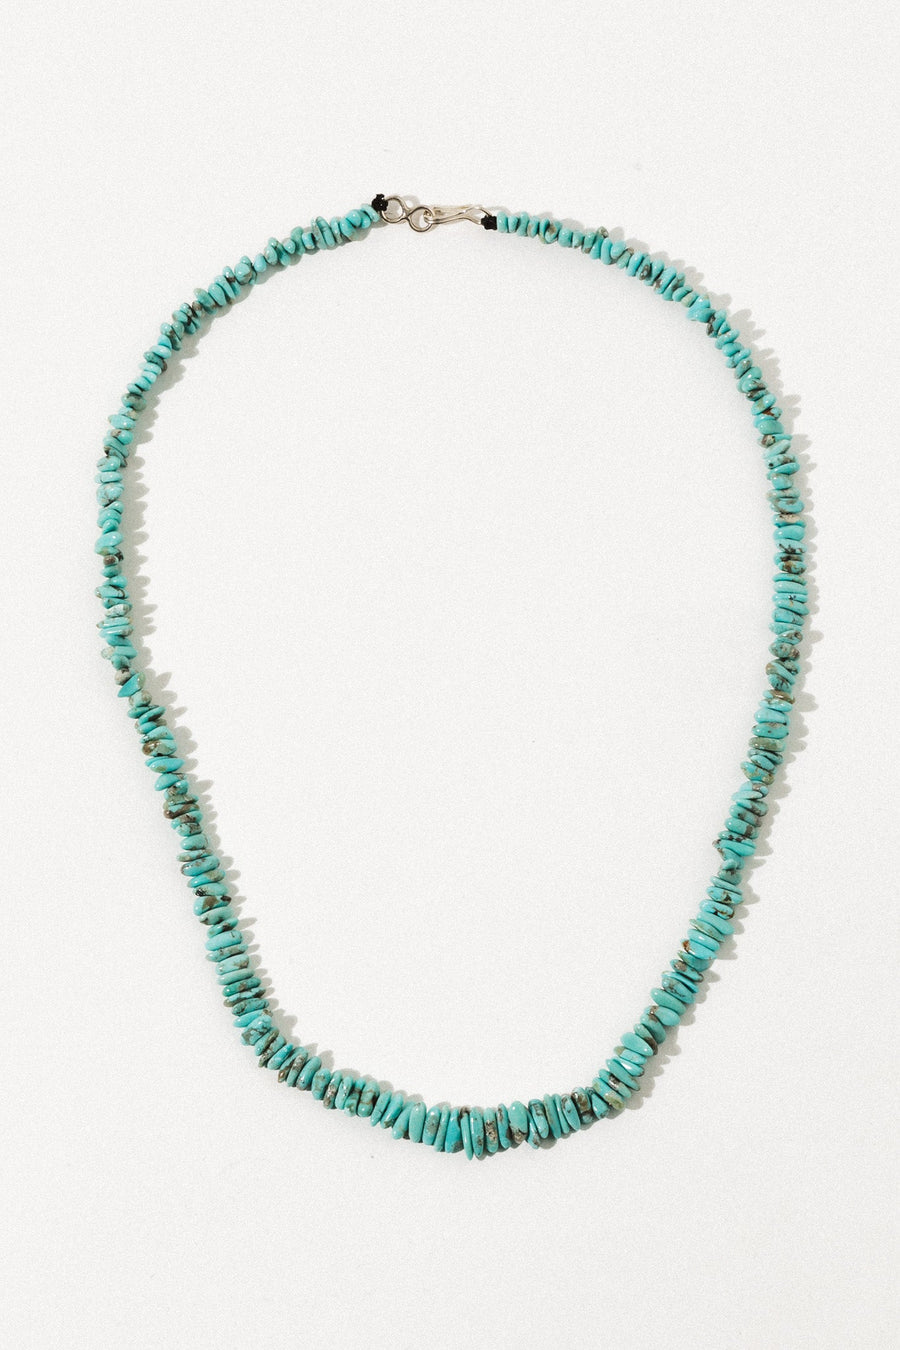 Sunwest Jewelry Silver / 18 inches Campitos Turquoise Necklace